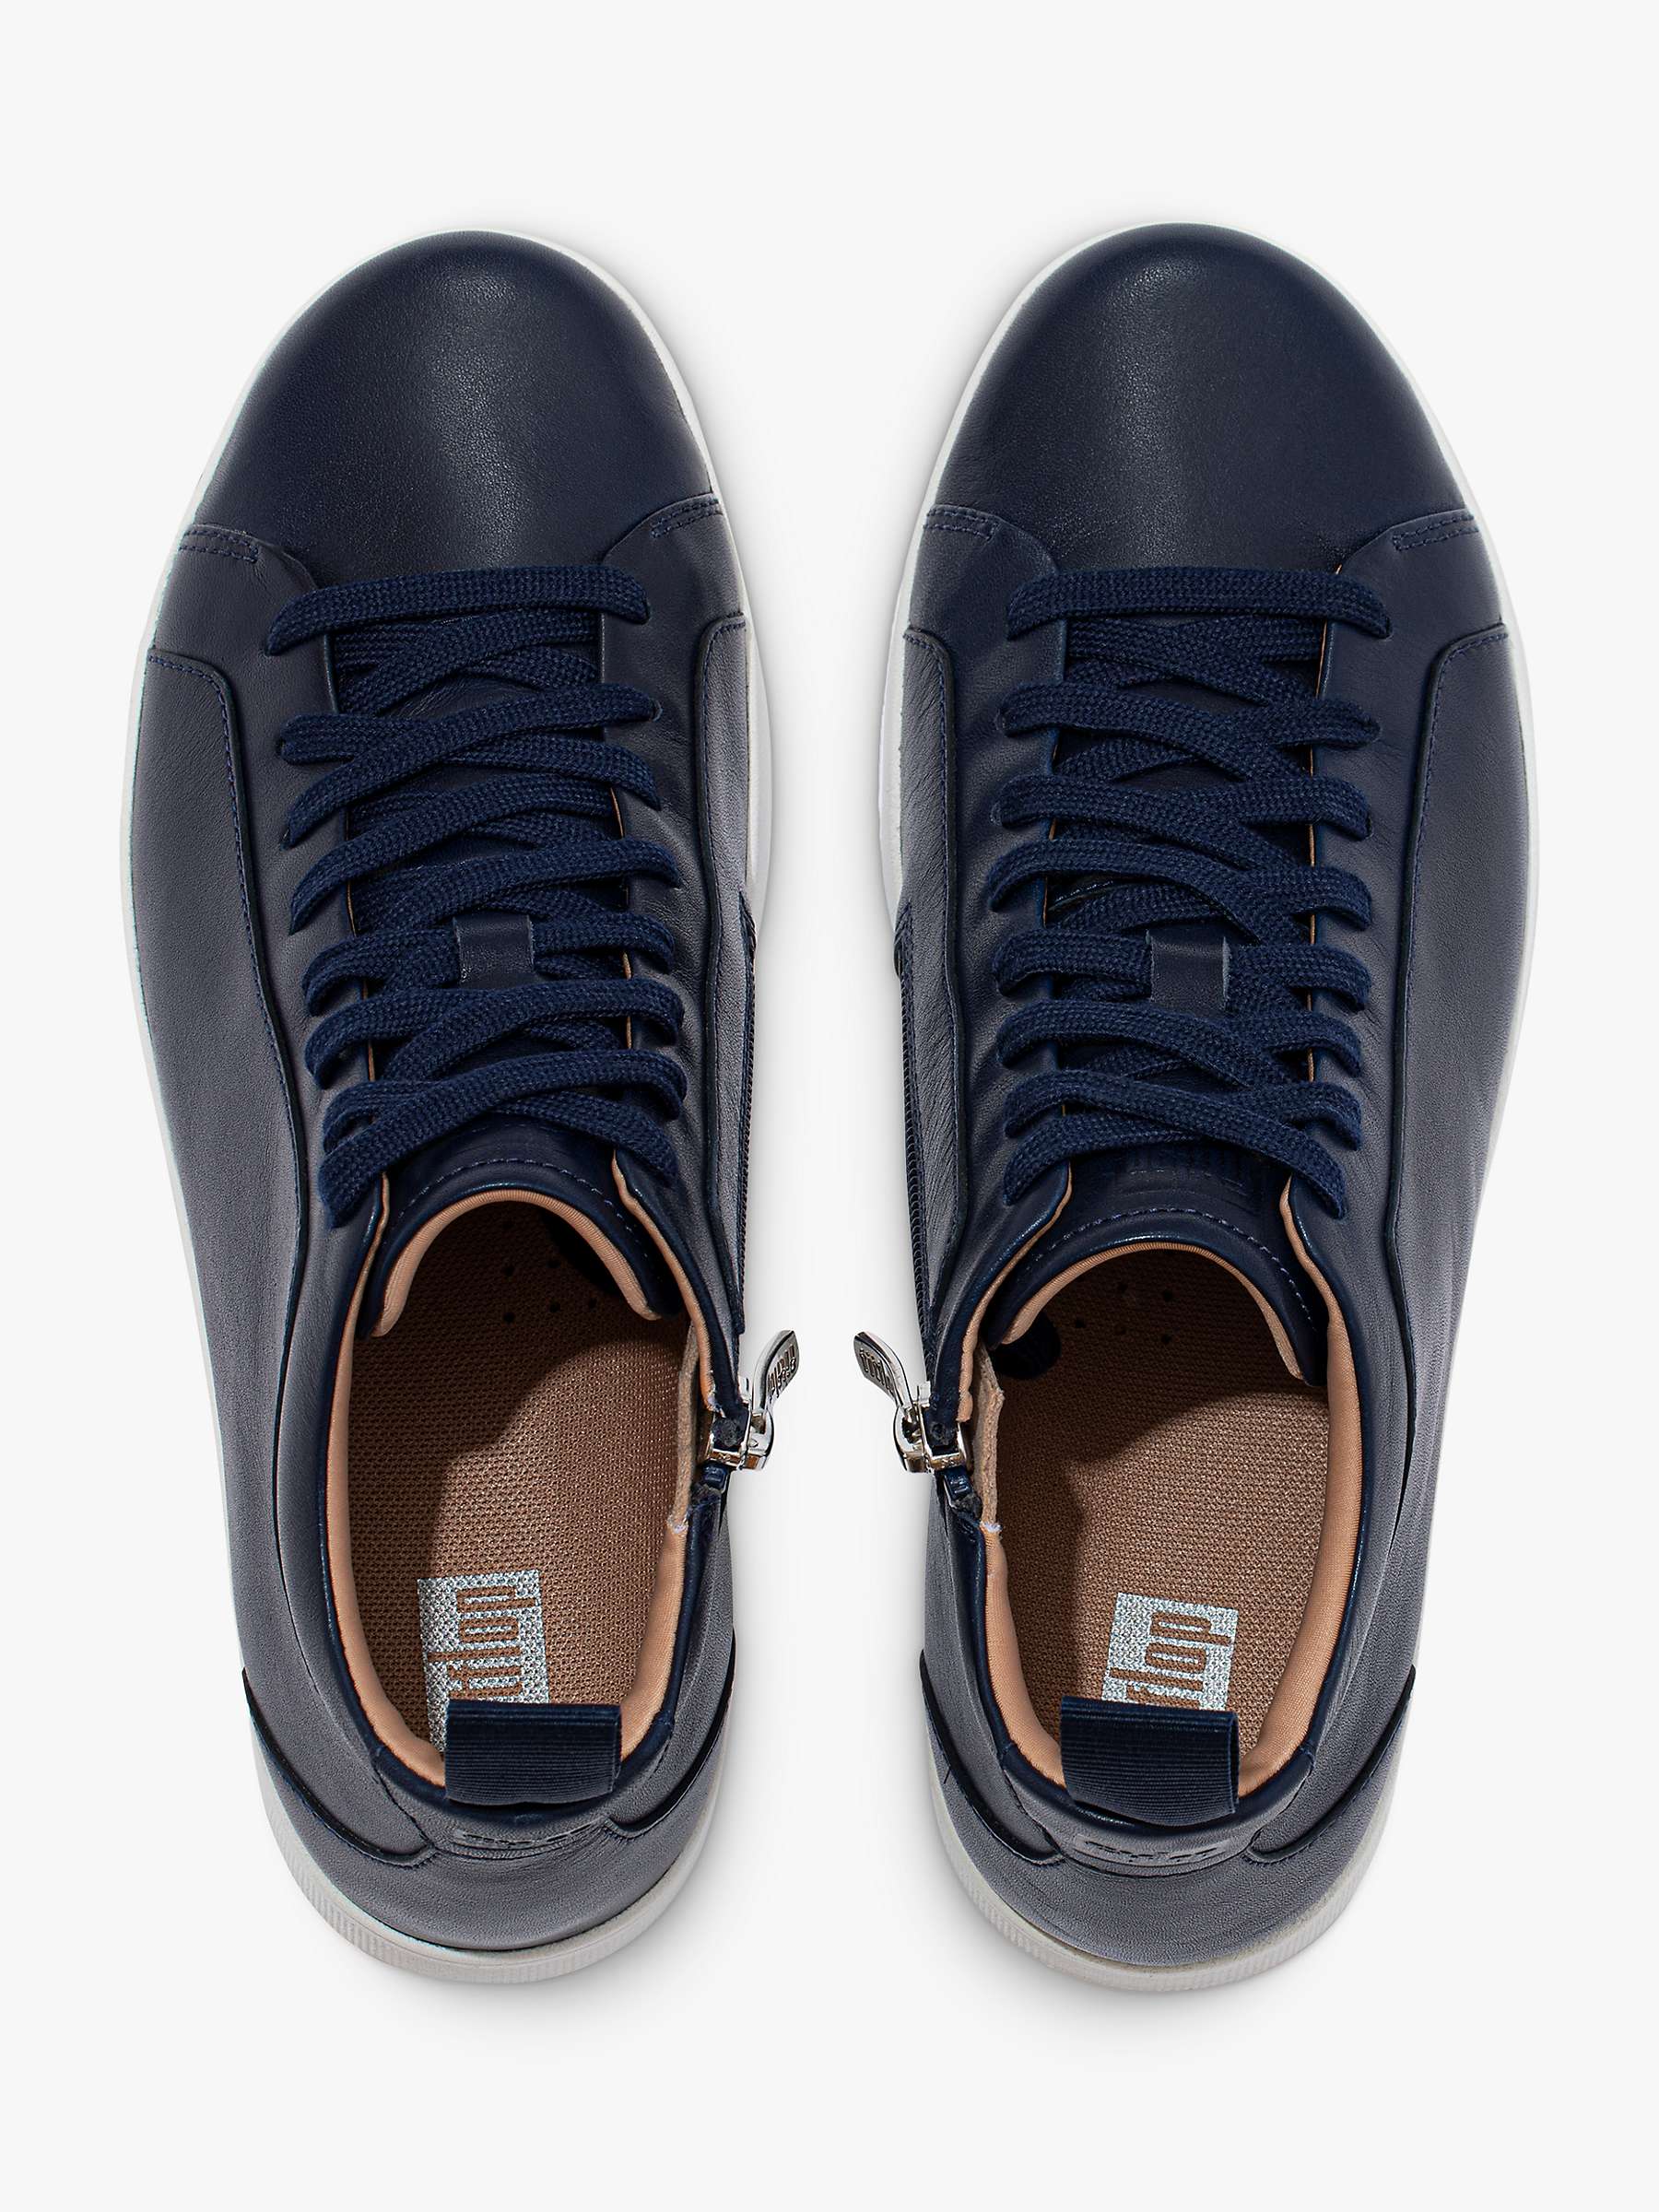 FitFlop Rally Leather Hi-Top Trainers, Midnight Navy at John Lewis ...